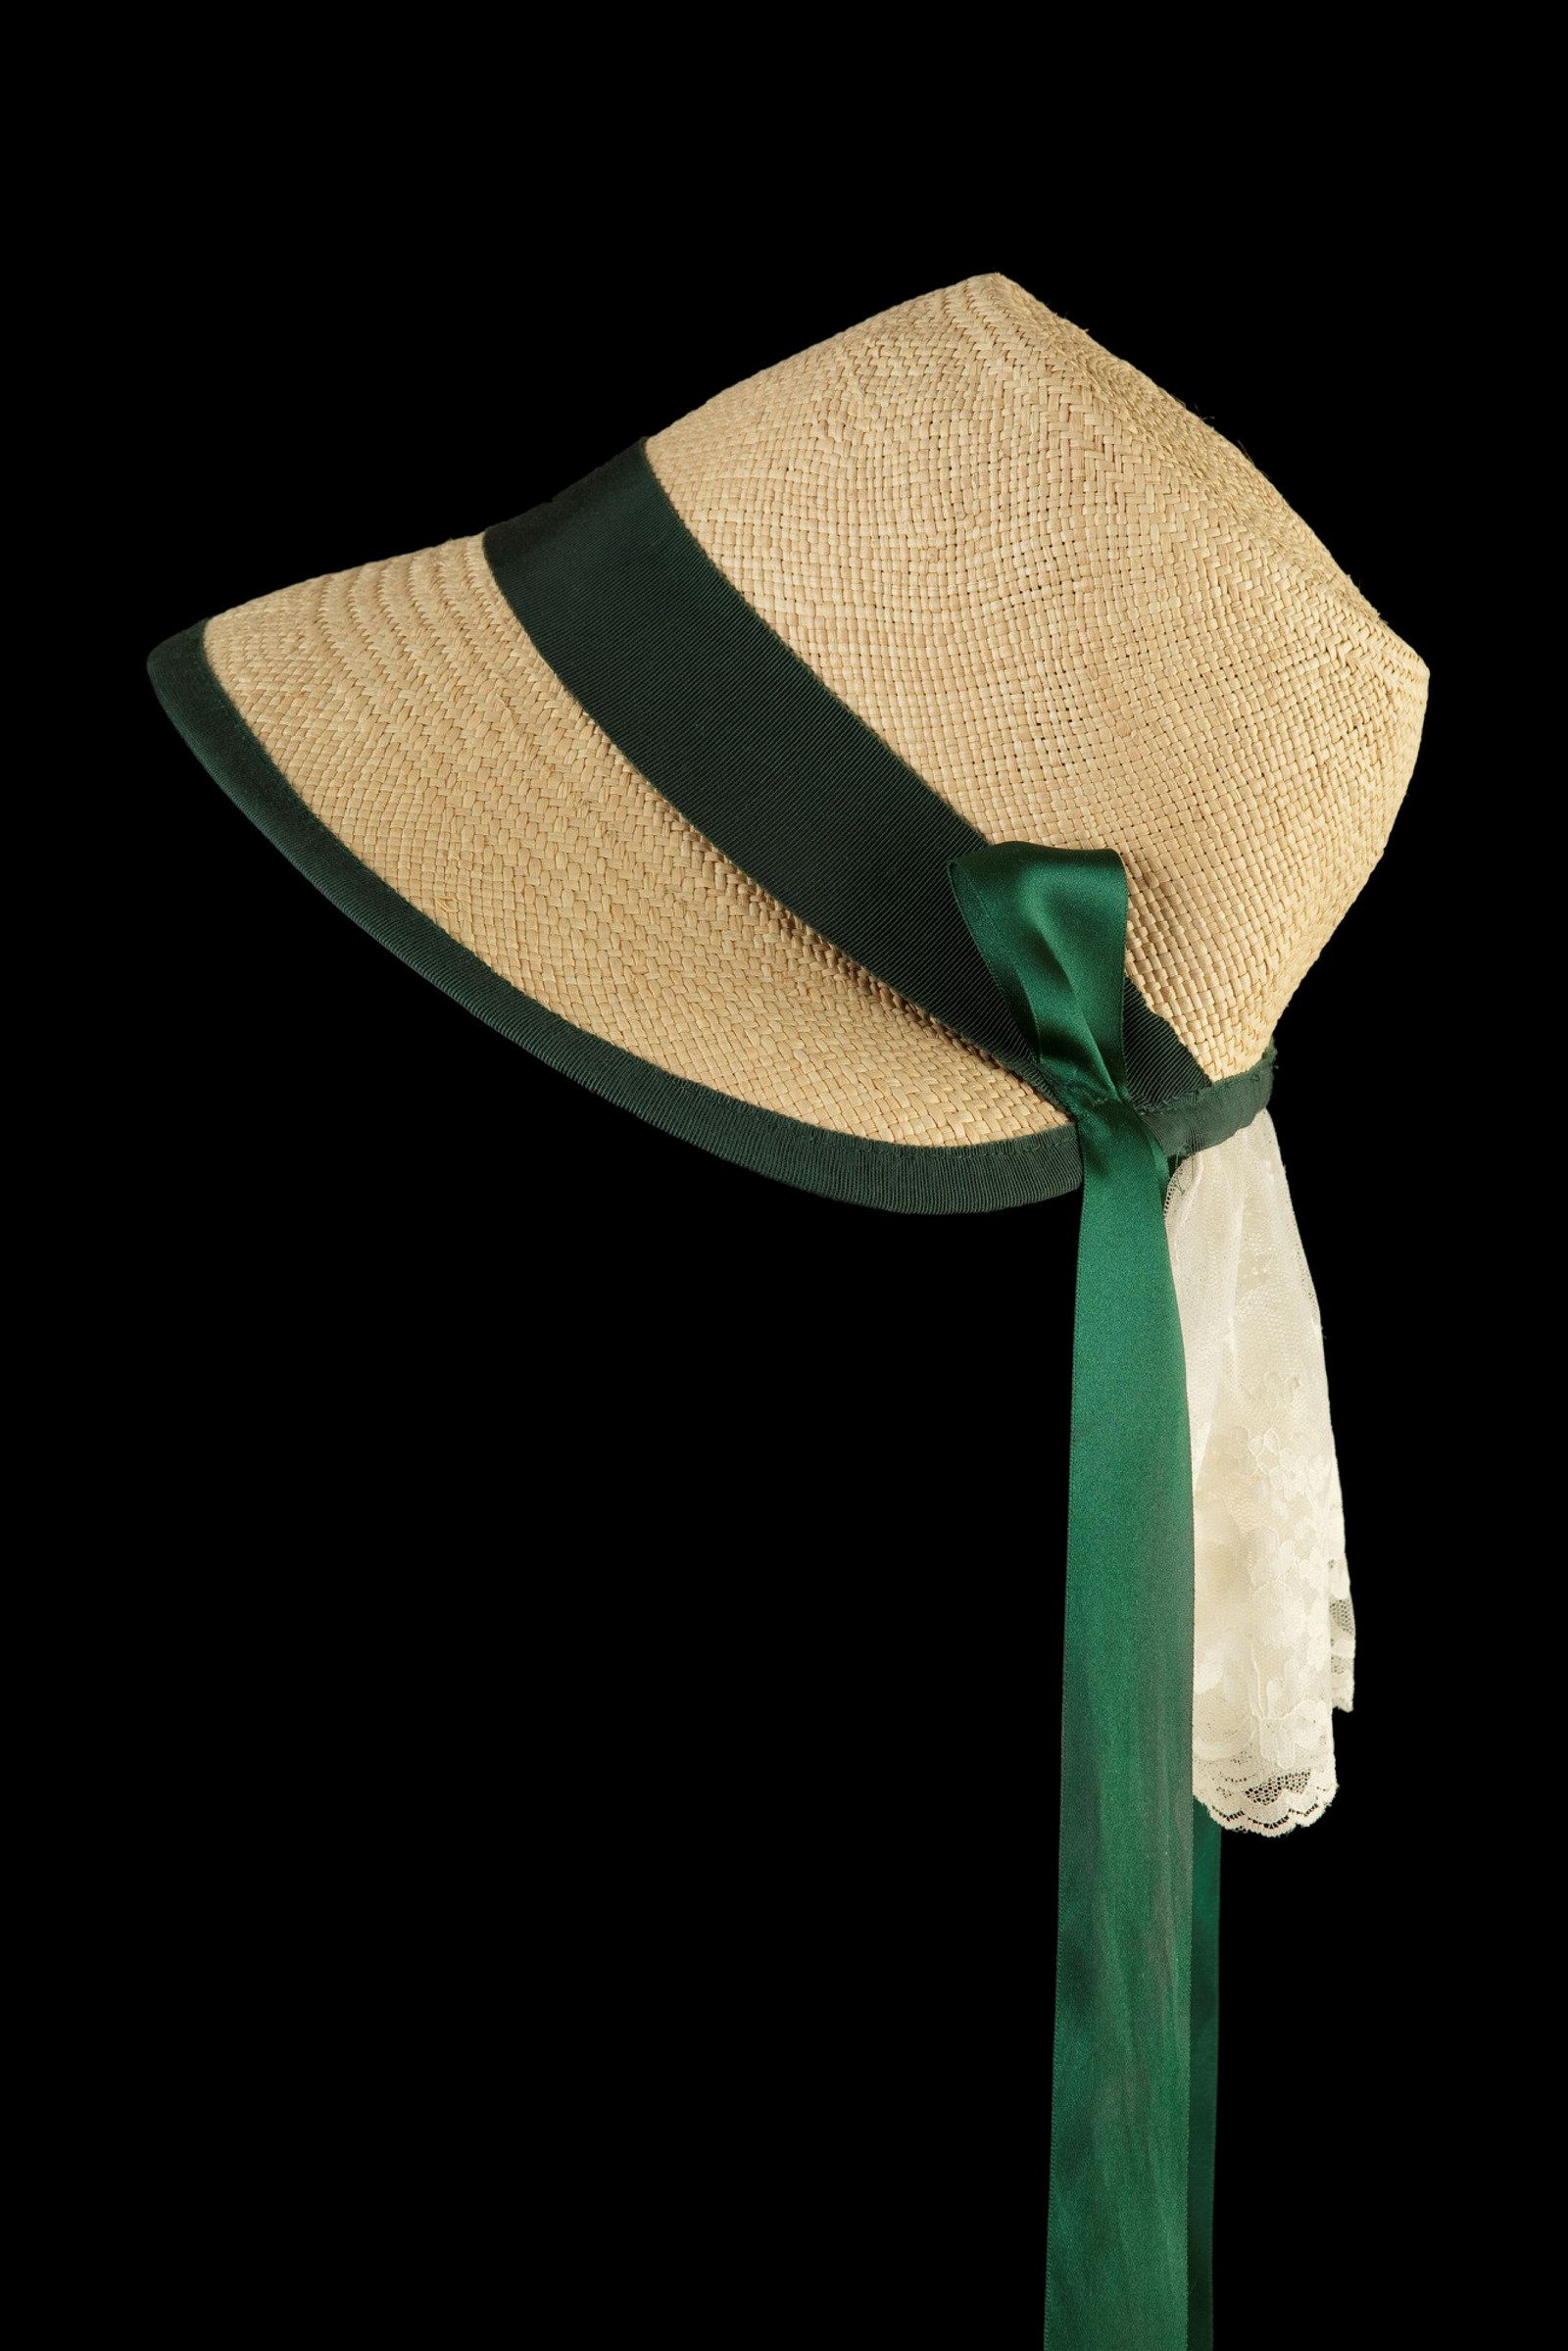 Reproduction of a mid nineteenth century cottage bonnet with green ribbon.